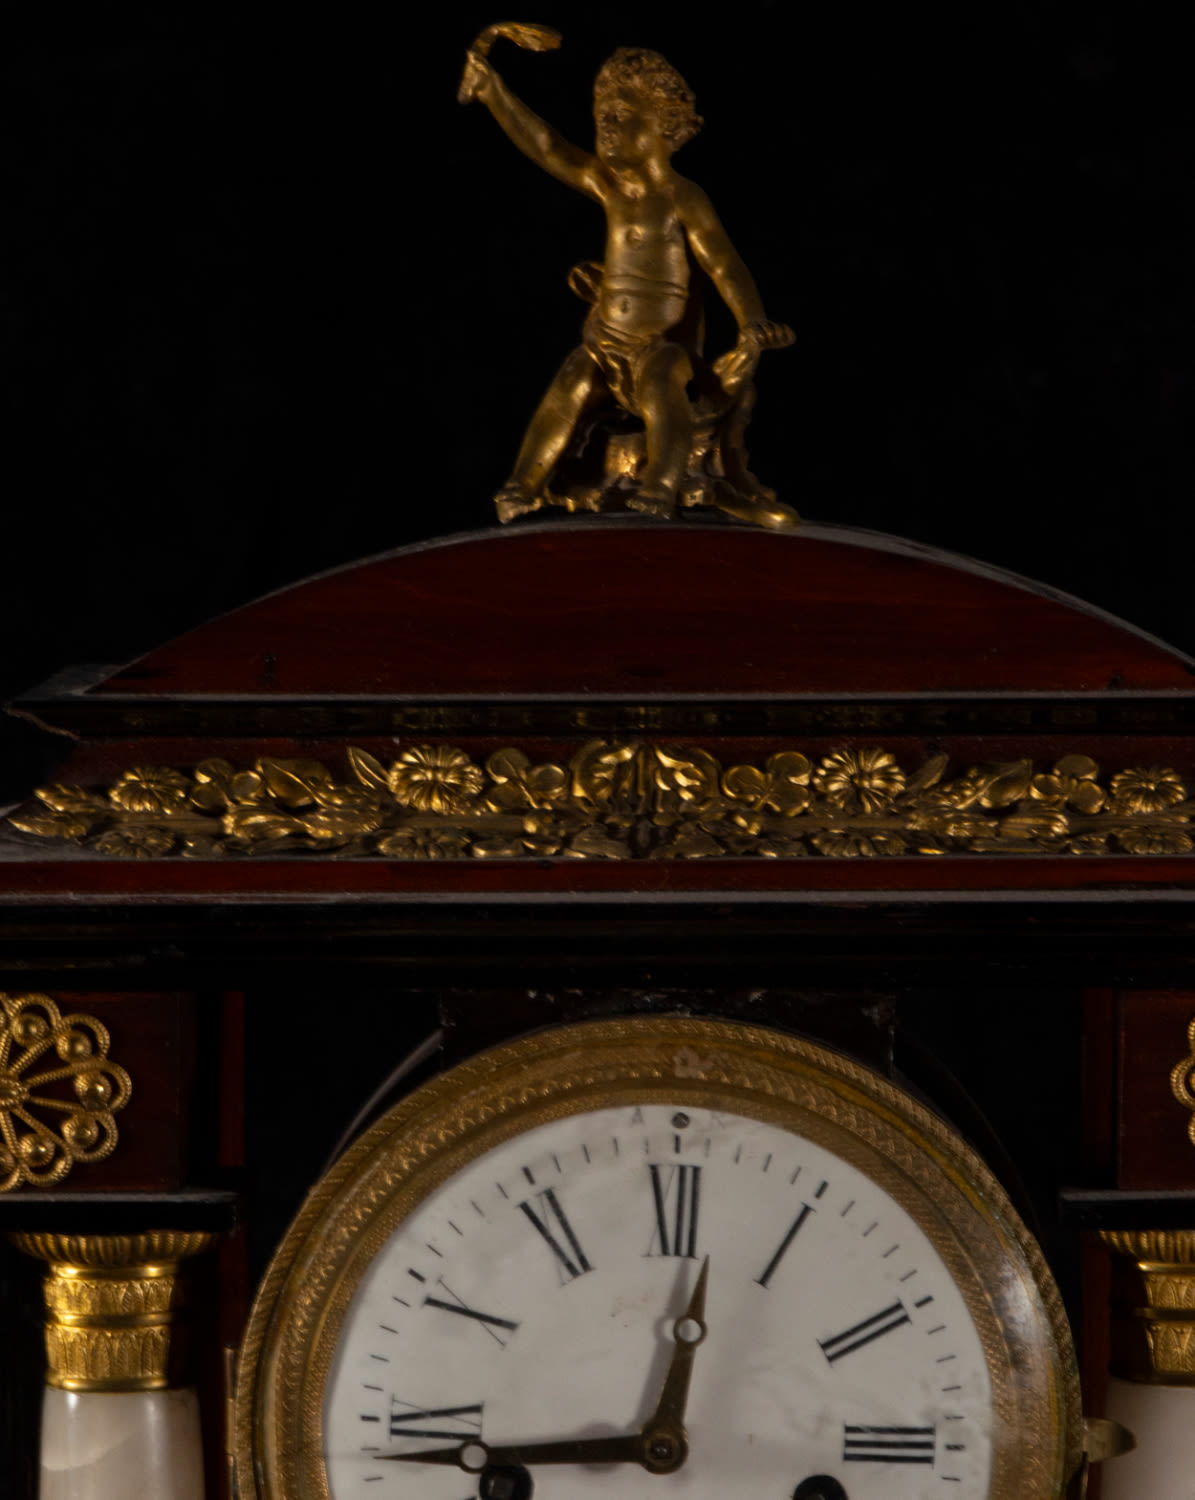 Beautiful Bilderrahmen Table Clock with Automata from the late 19th century, Austria, with Mercury a - Image 3 of 7